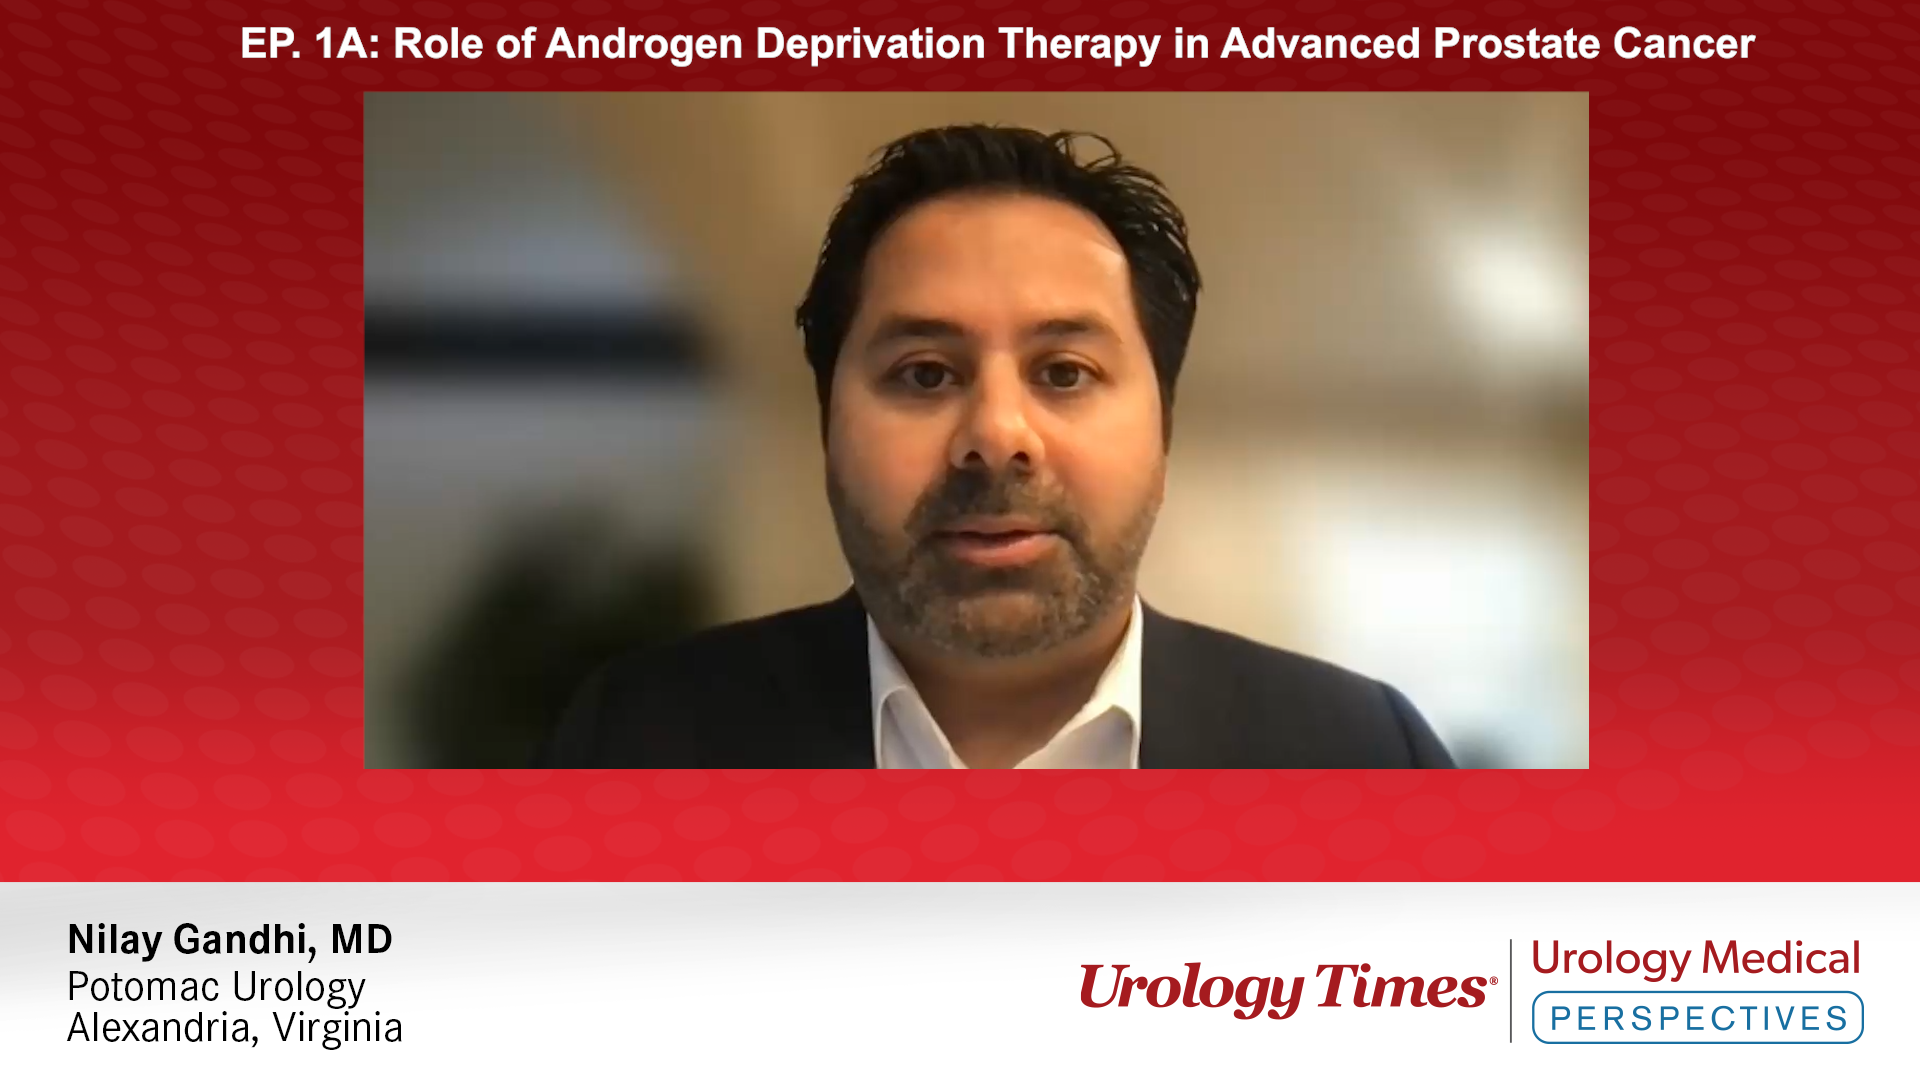 EP. 1A: Role of Androgen Deprivation Therapy in Advanced Prostate Cancer